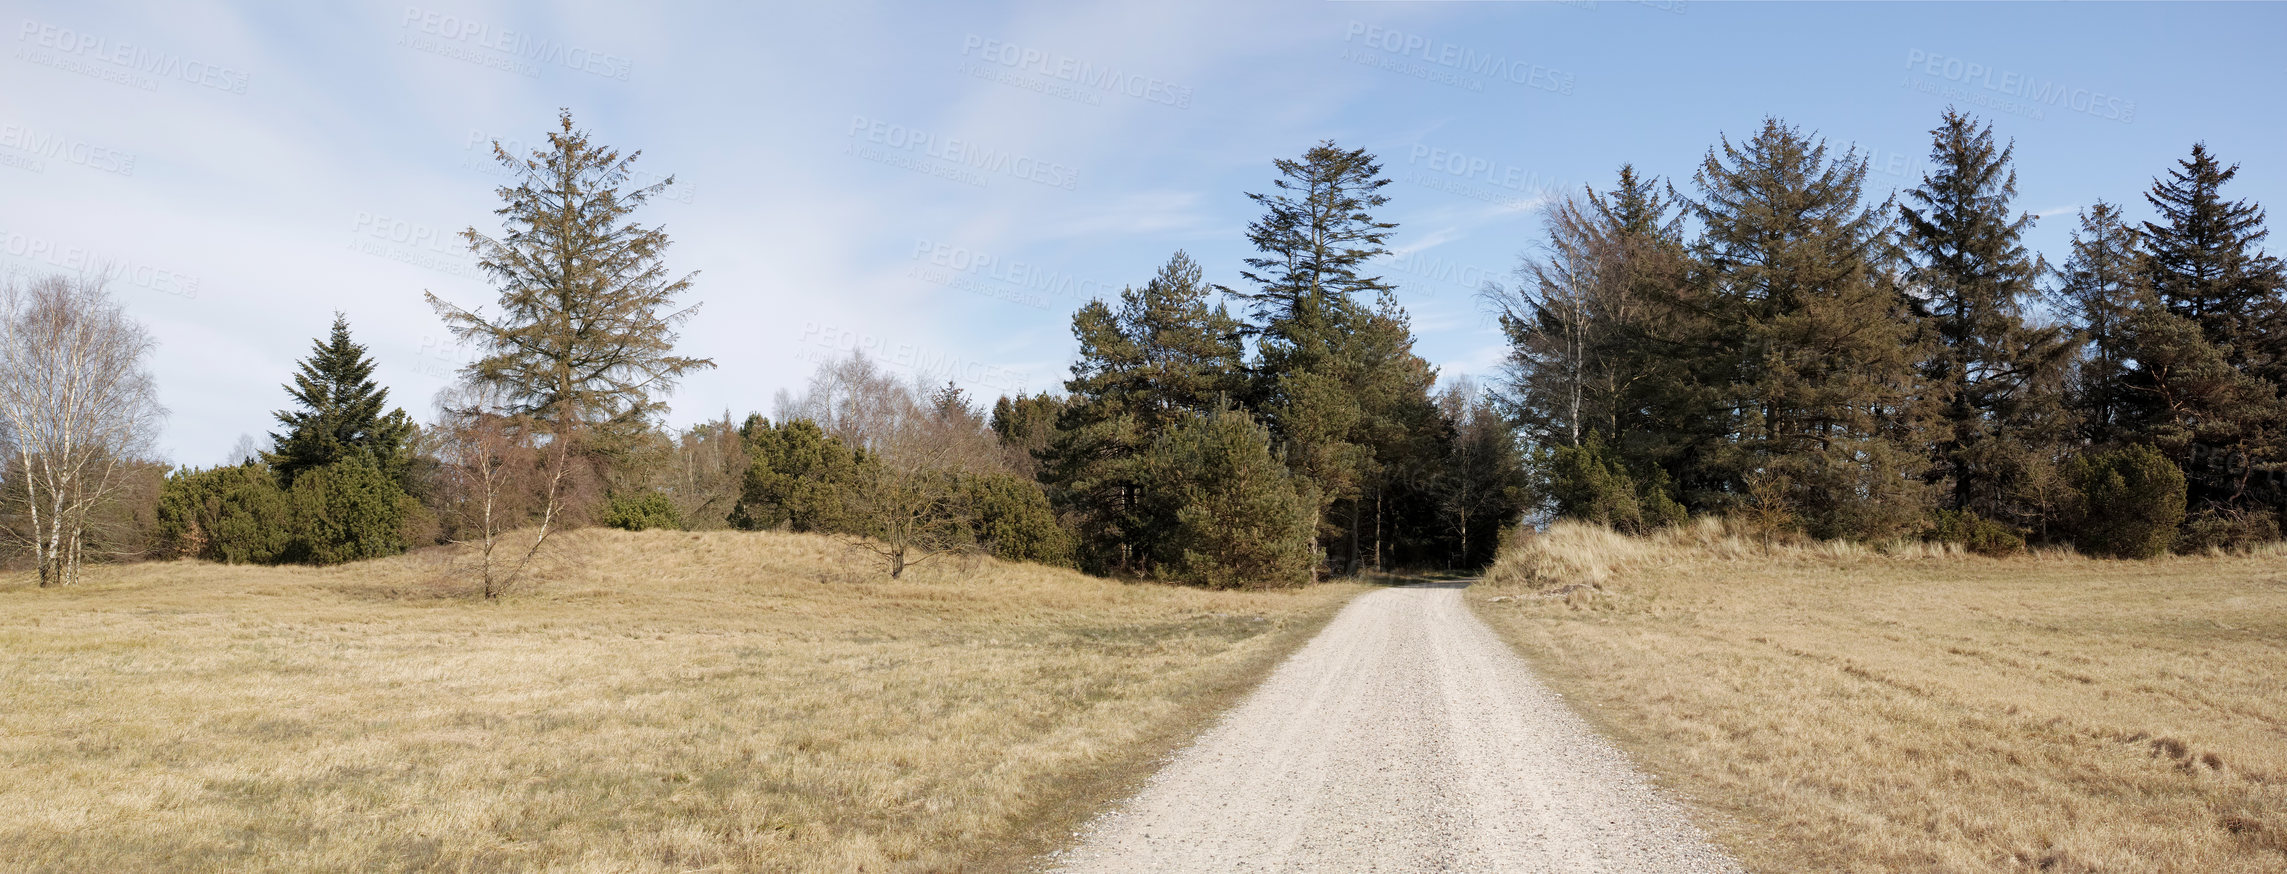 Buy stock photo Copyspace with a path winding through dry grassland in nature in Kattegat, Jutland, Denmark against a blue sky background. Scenic landscape of a gravel road leading to a forest in a plain open meadow